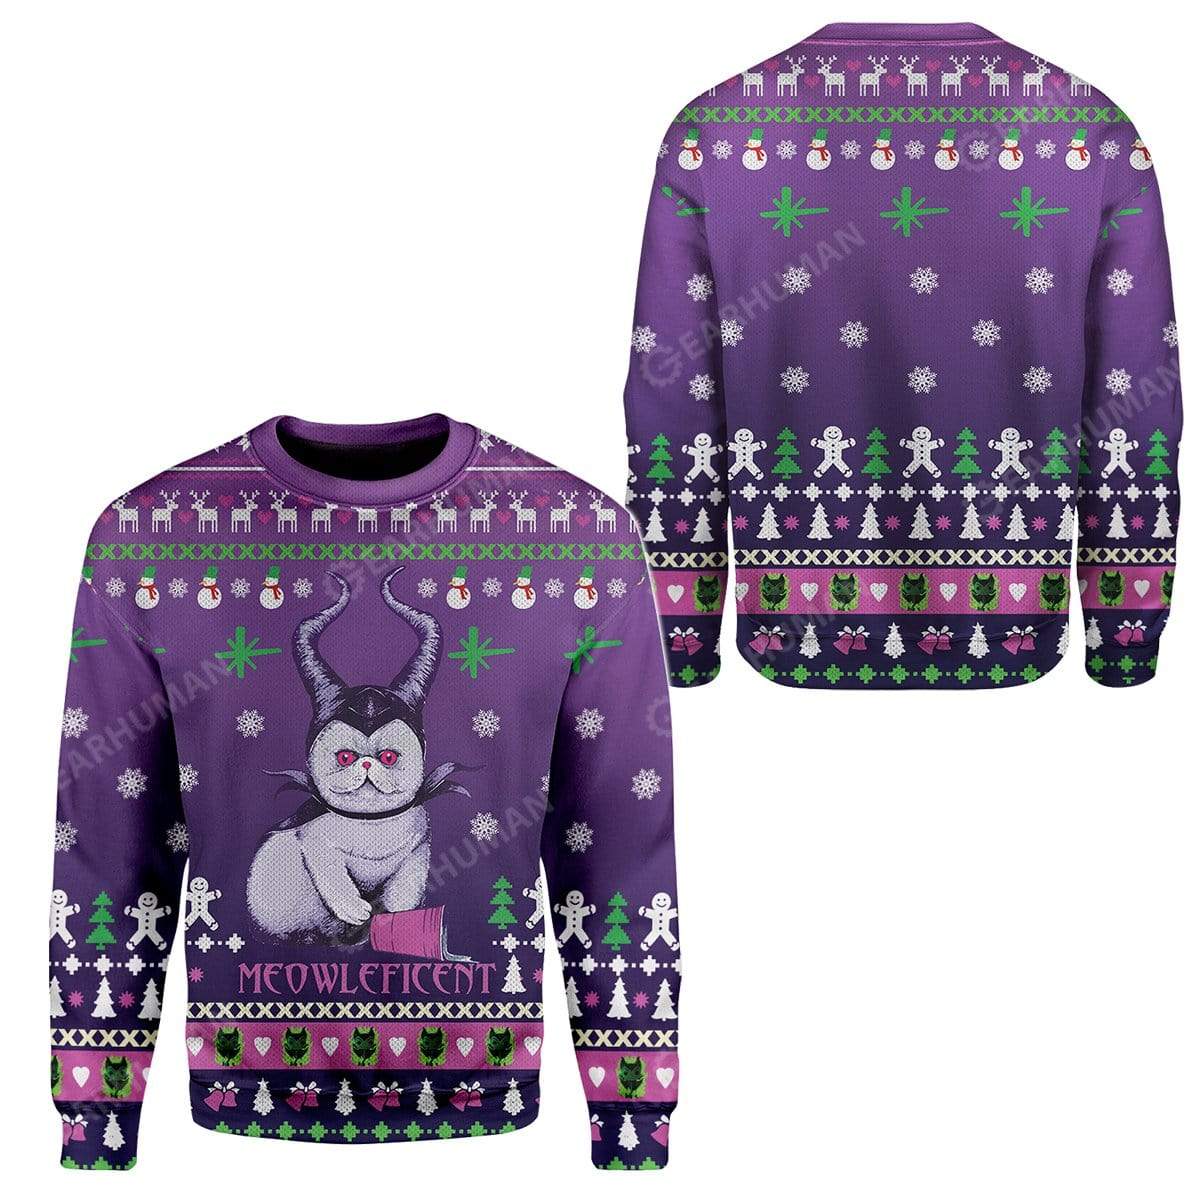 Ugly Meowleficent Custom Sweater Apparel HD-DT13111912 Ugly Christmas Sweater 